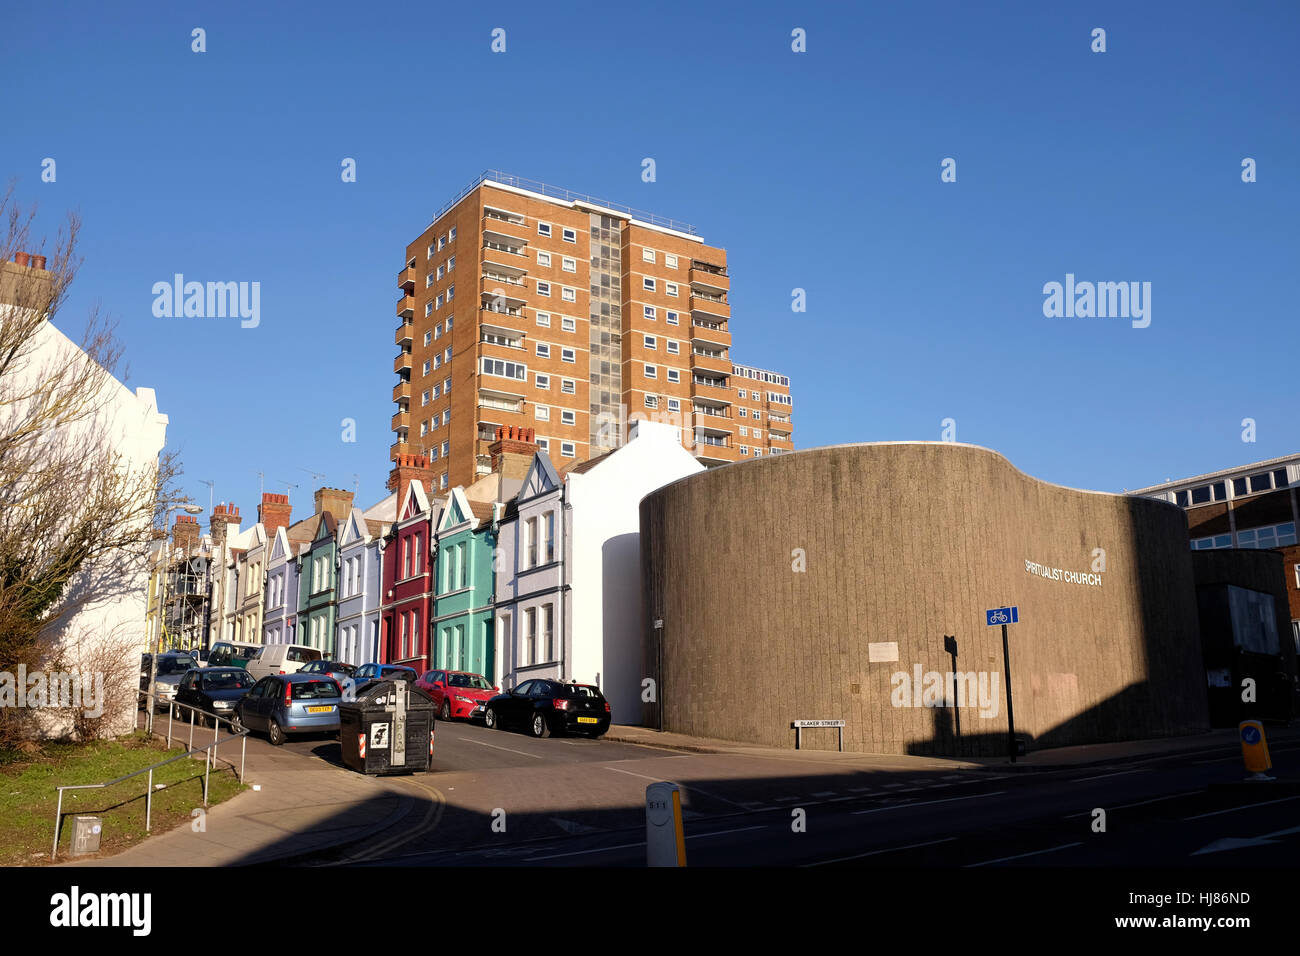 A clash of architecture styles by Blaker Street in Brighton Stock Photo